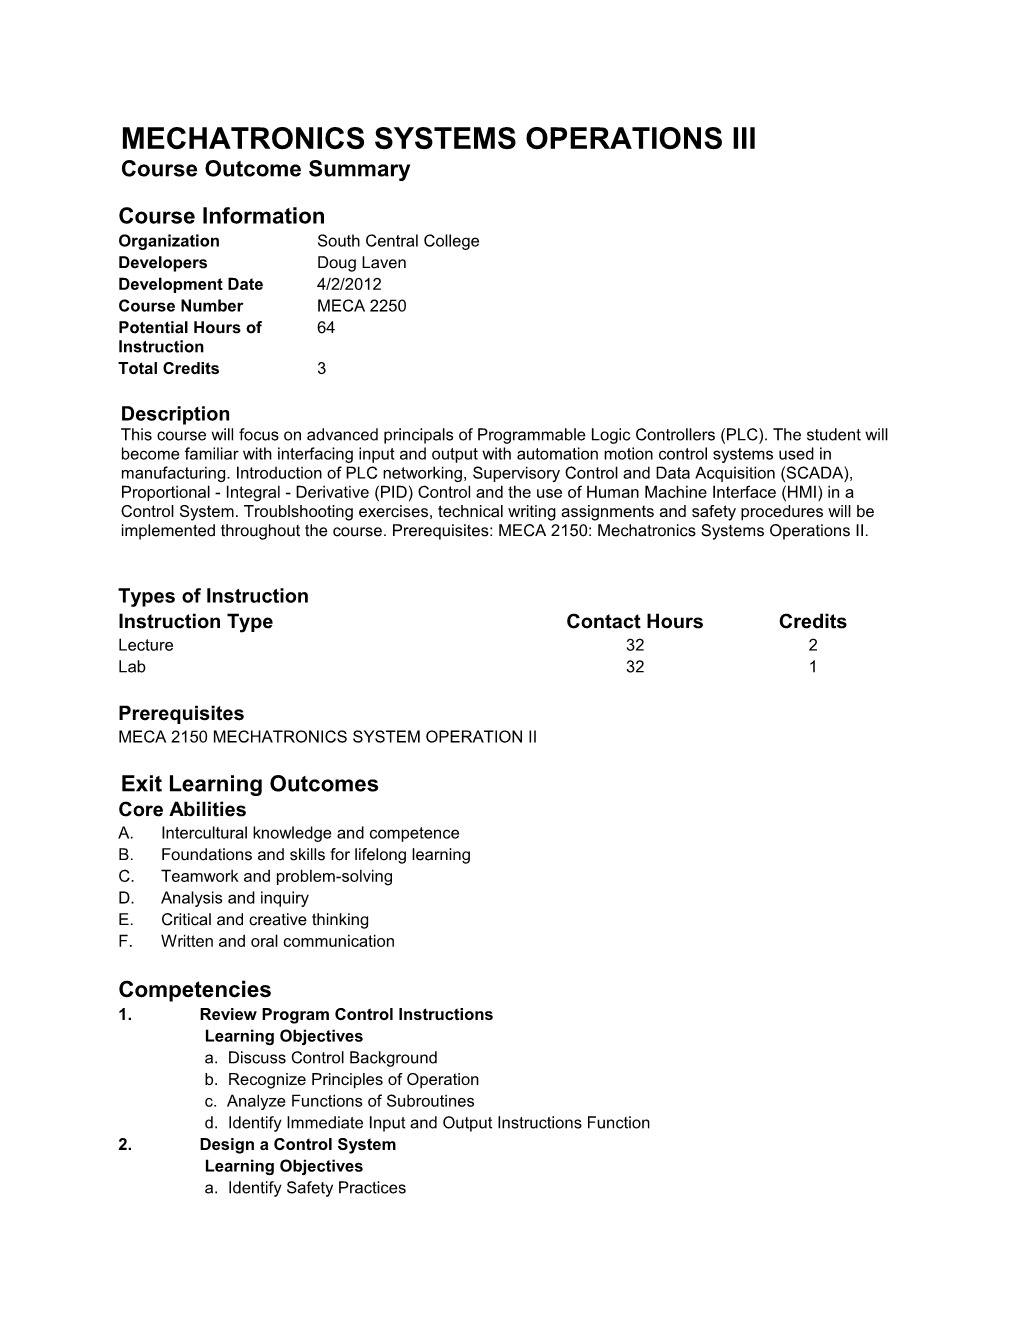 MECHATRONICS SYSTEMS OPERATIONS III Course Outcome Summary